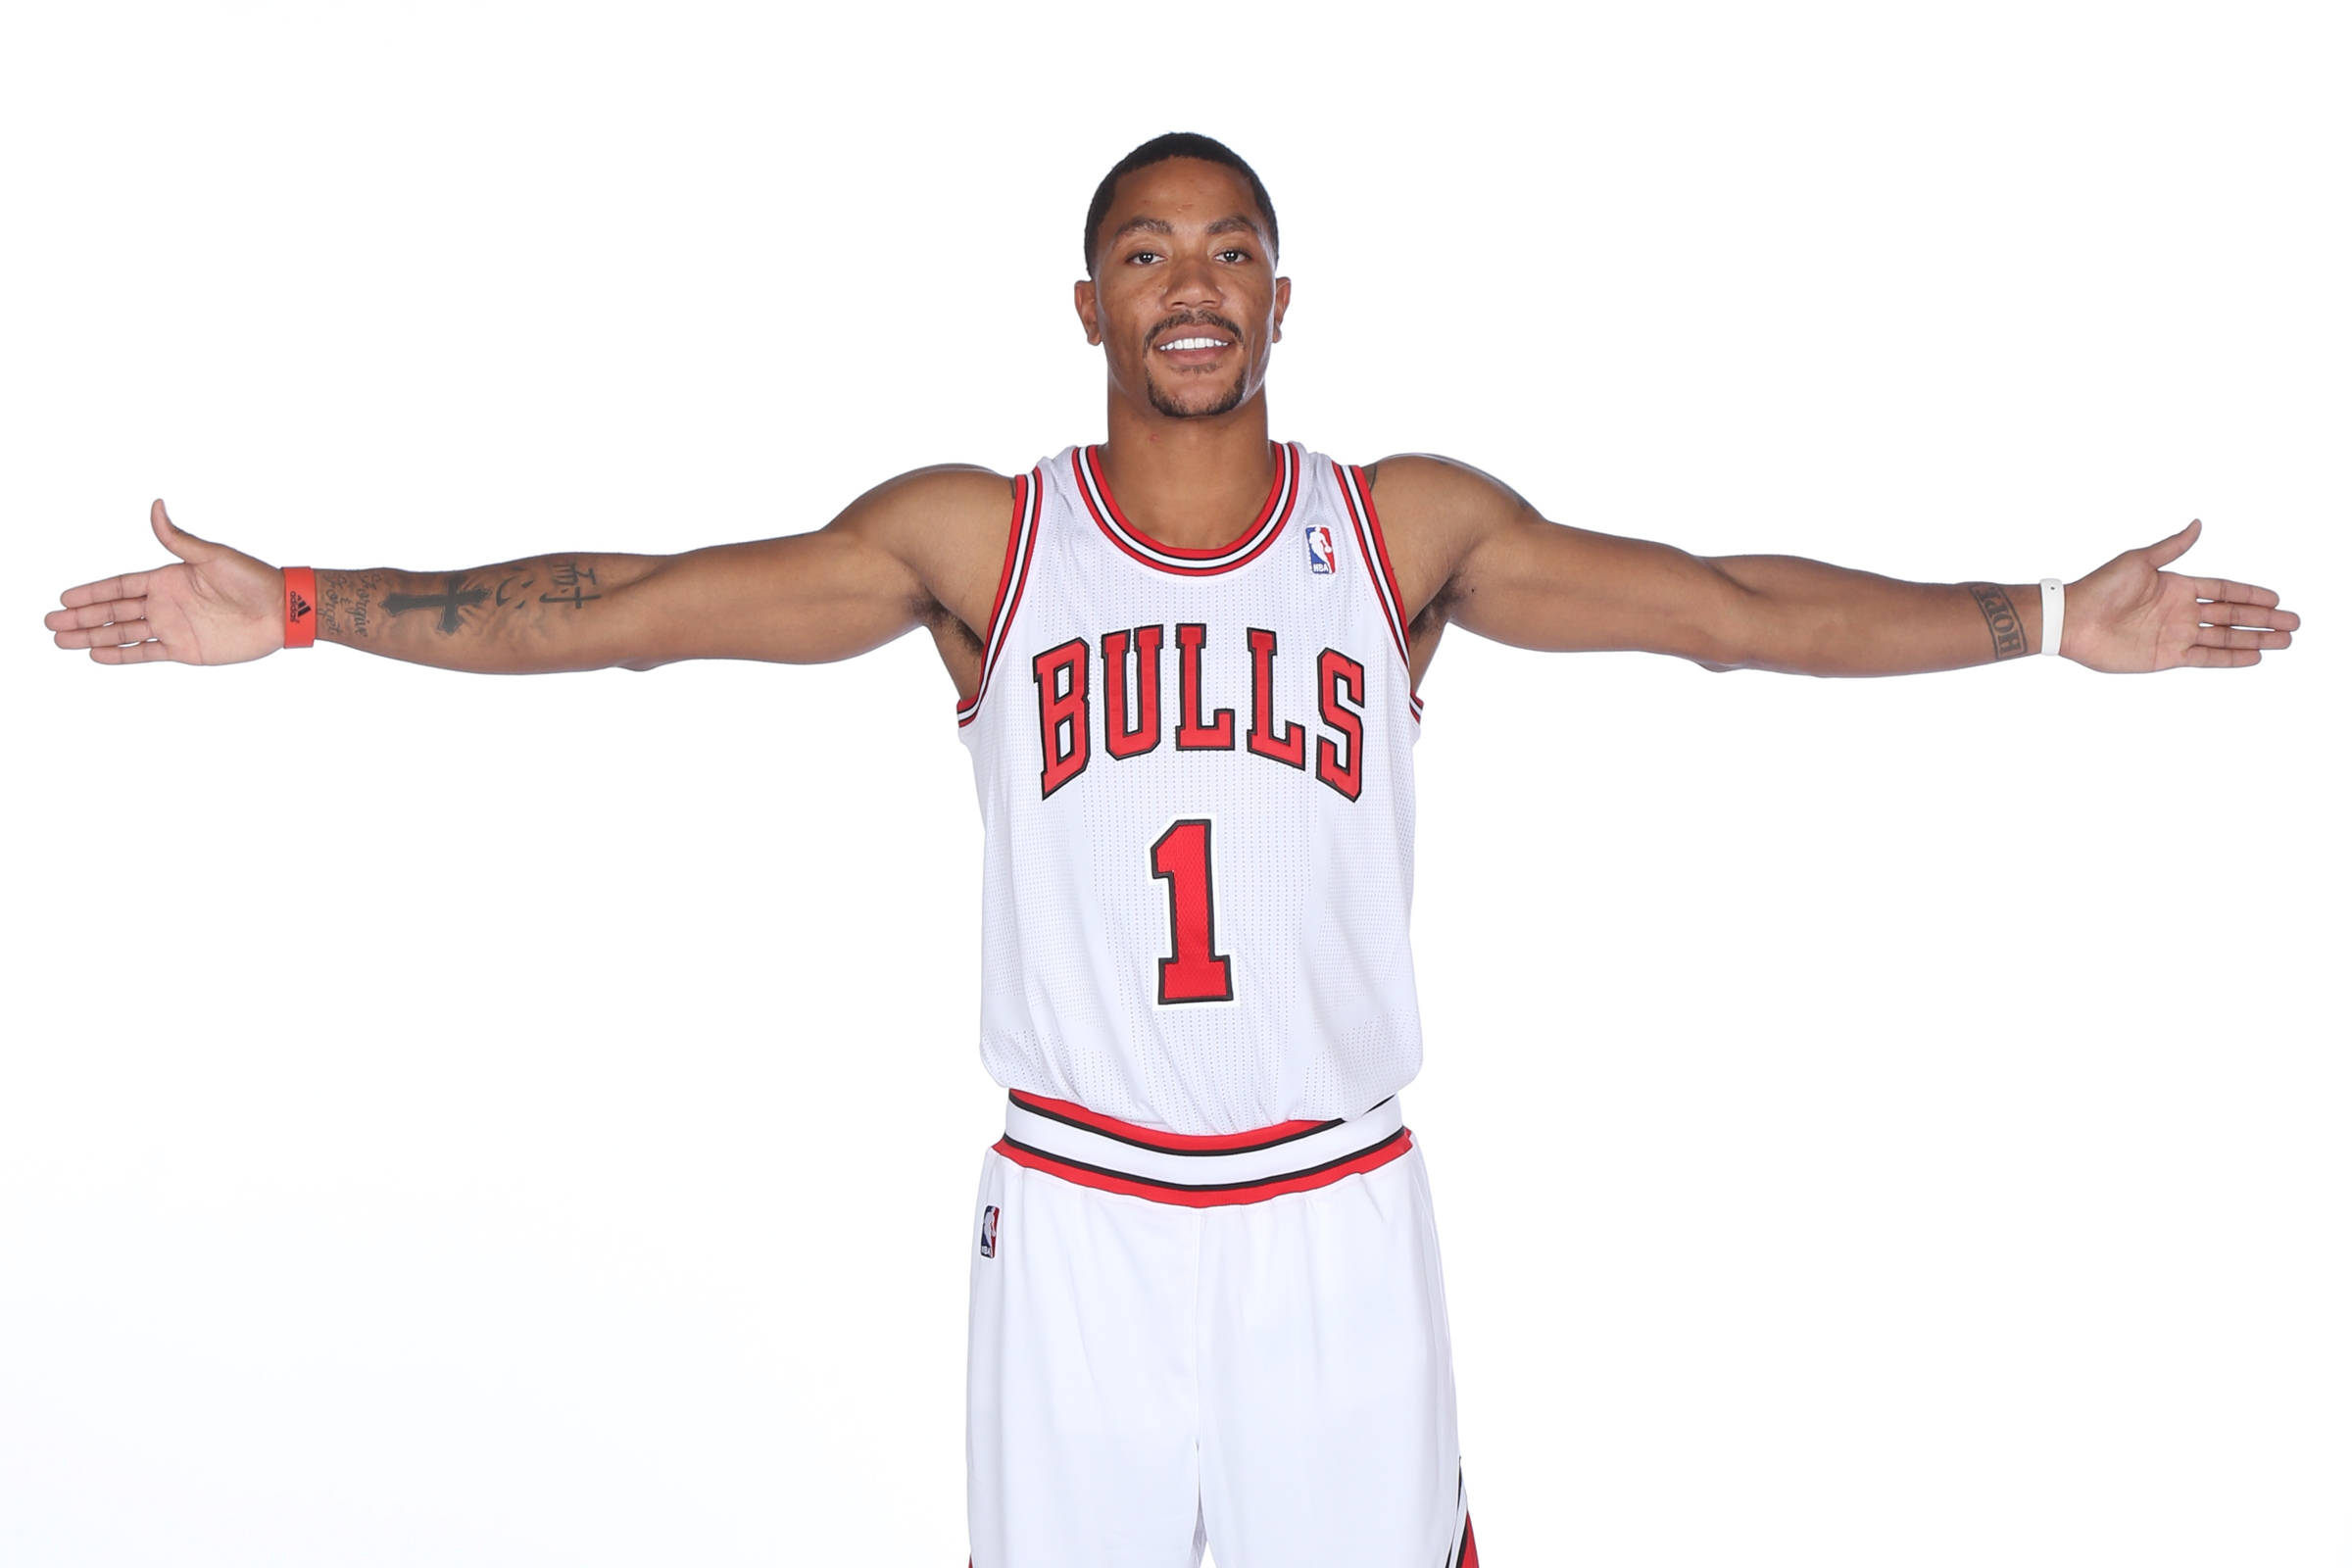 Derrick Rose of the Chicago Bulls poses for a portrait during the News  Photo - Getty Images